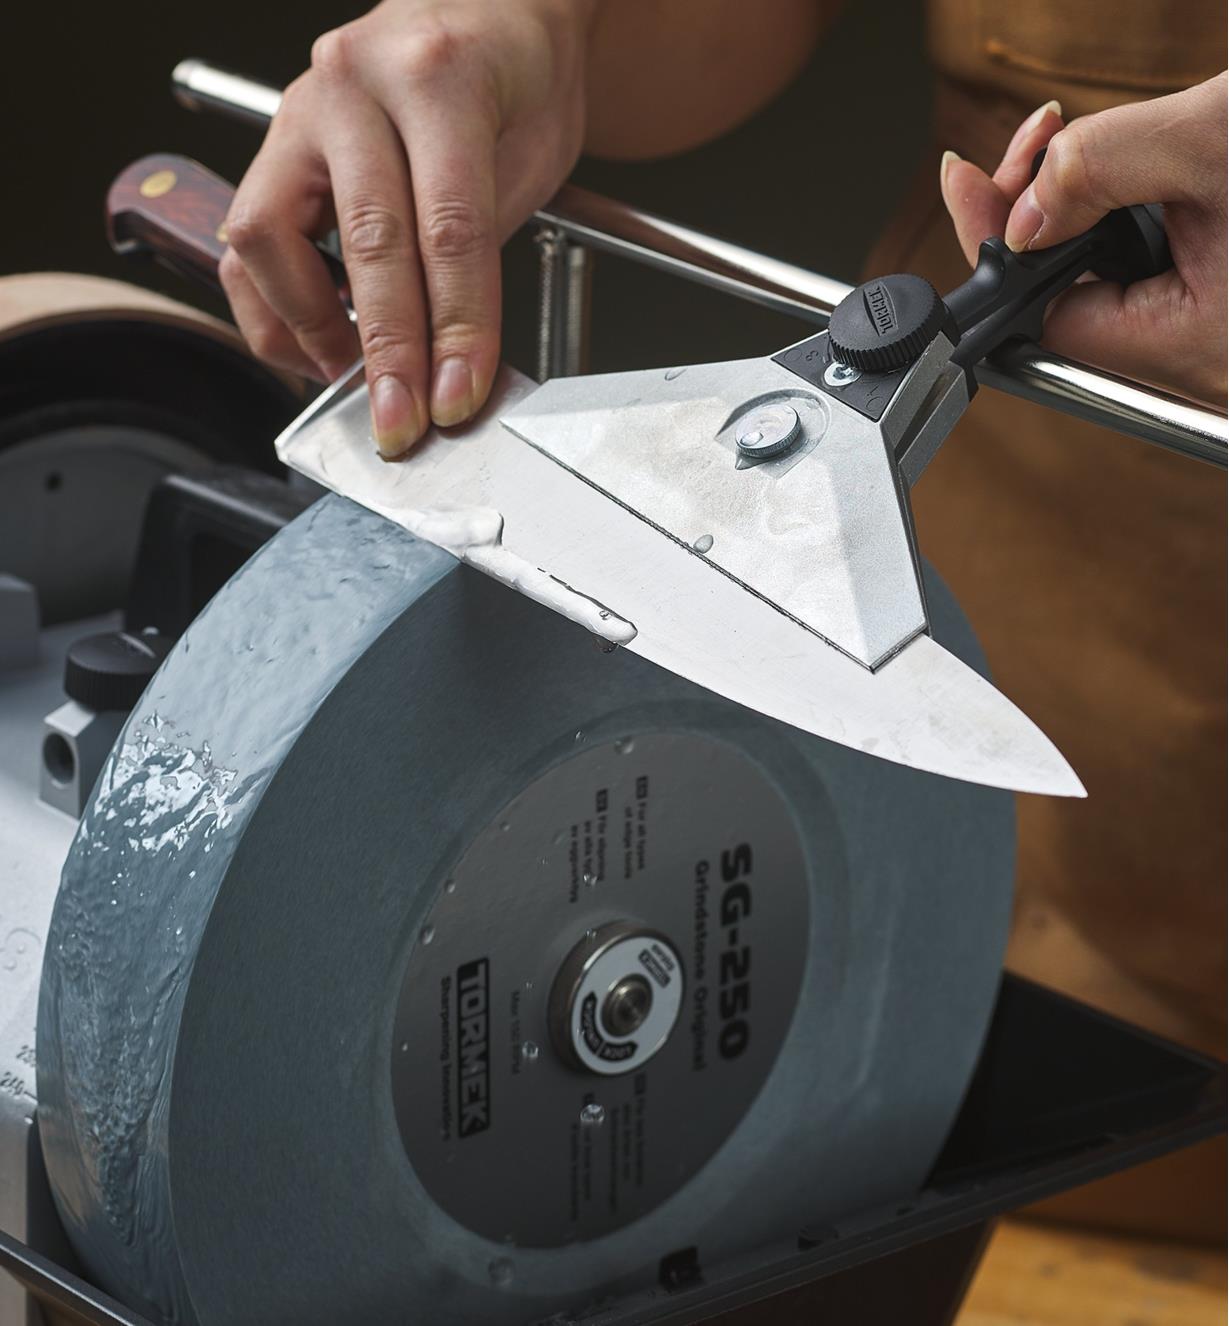 A wide knife jig holds a large knife blade being sharpened on a wheel